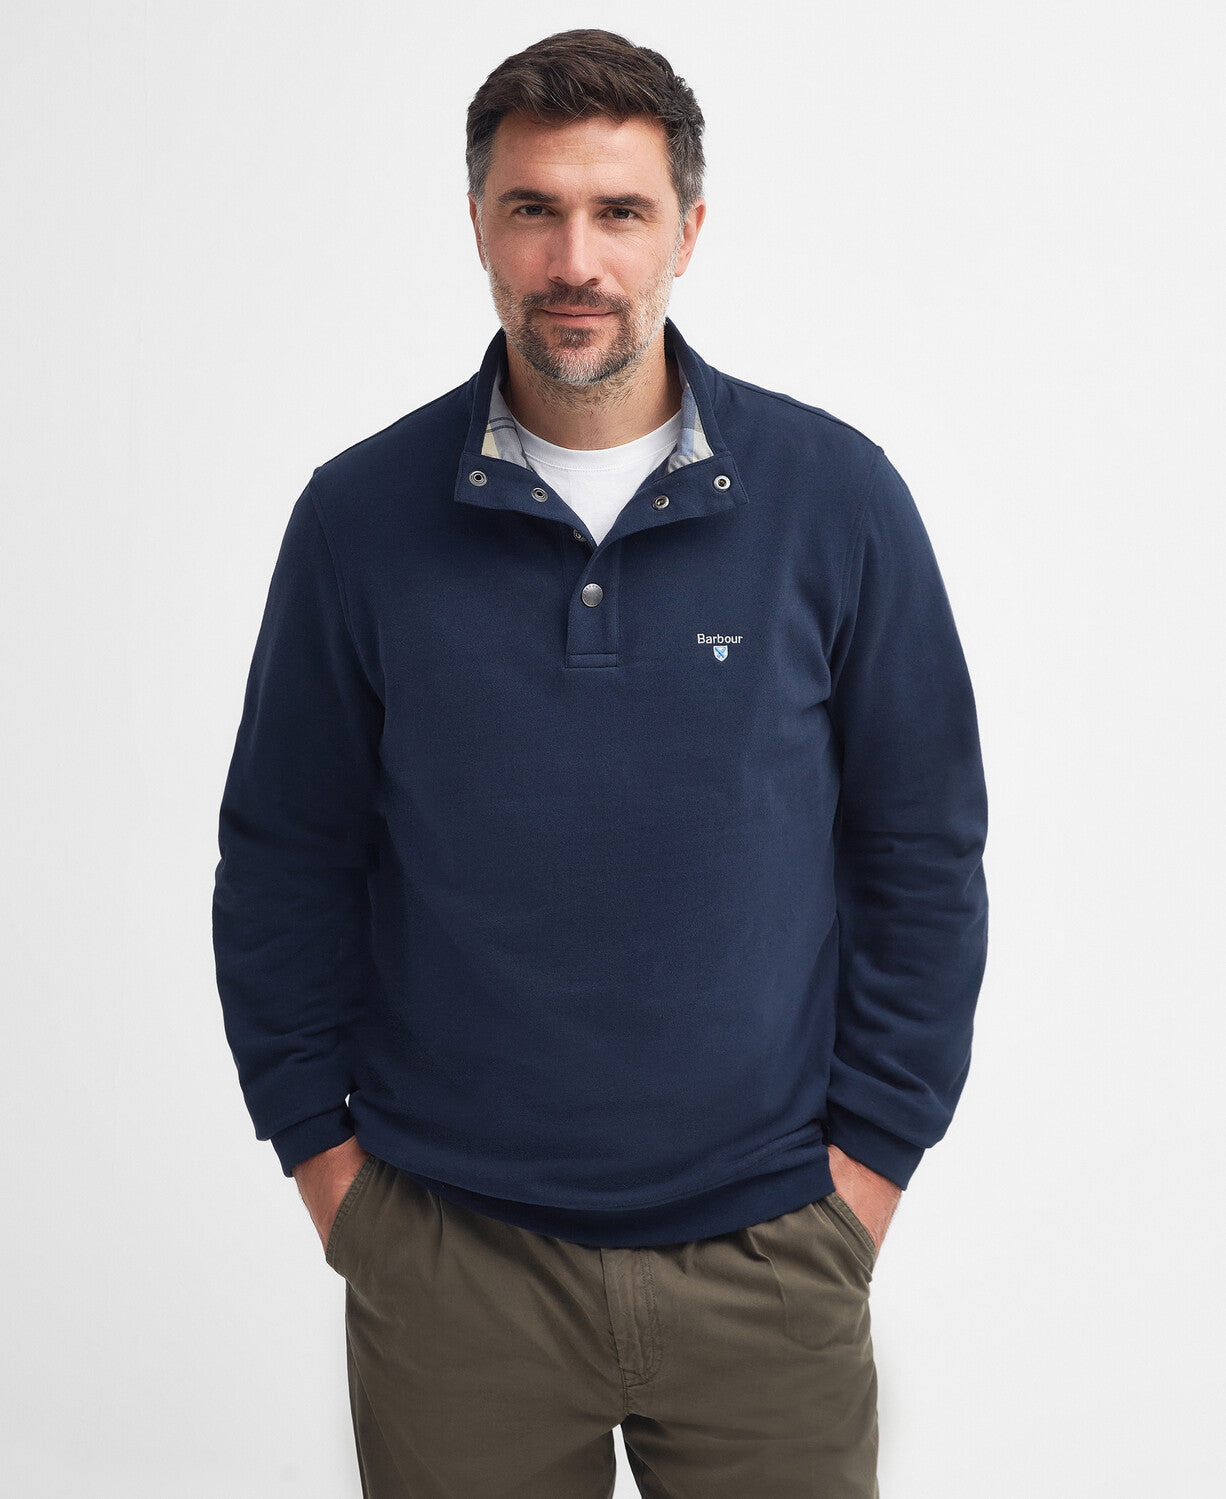 Barbour Egglescliff Navy Over Layer